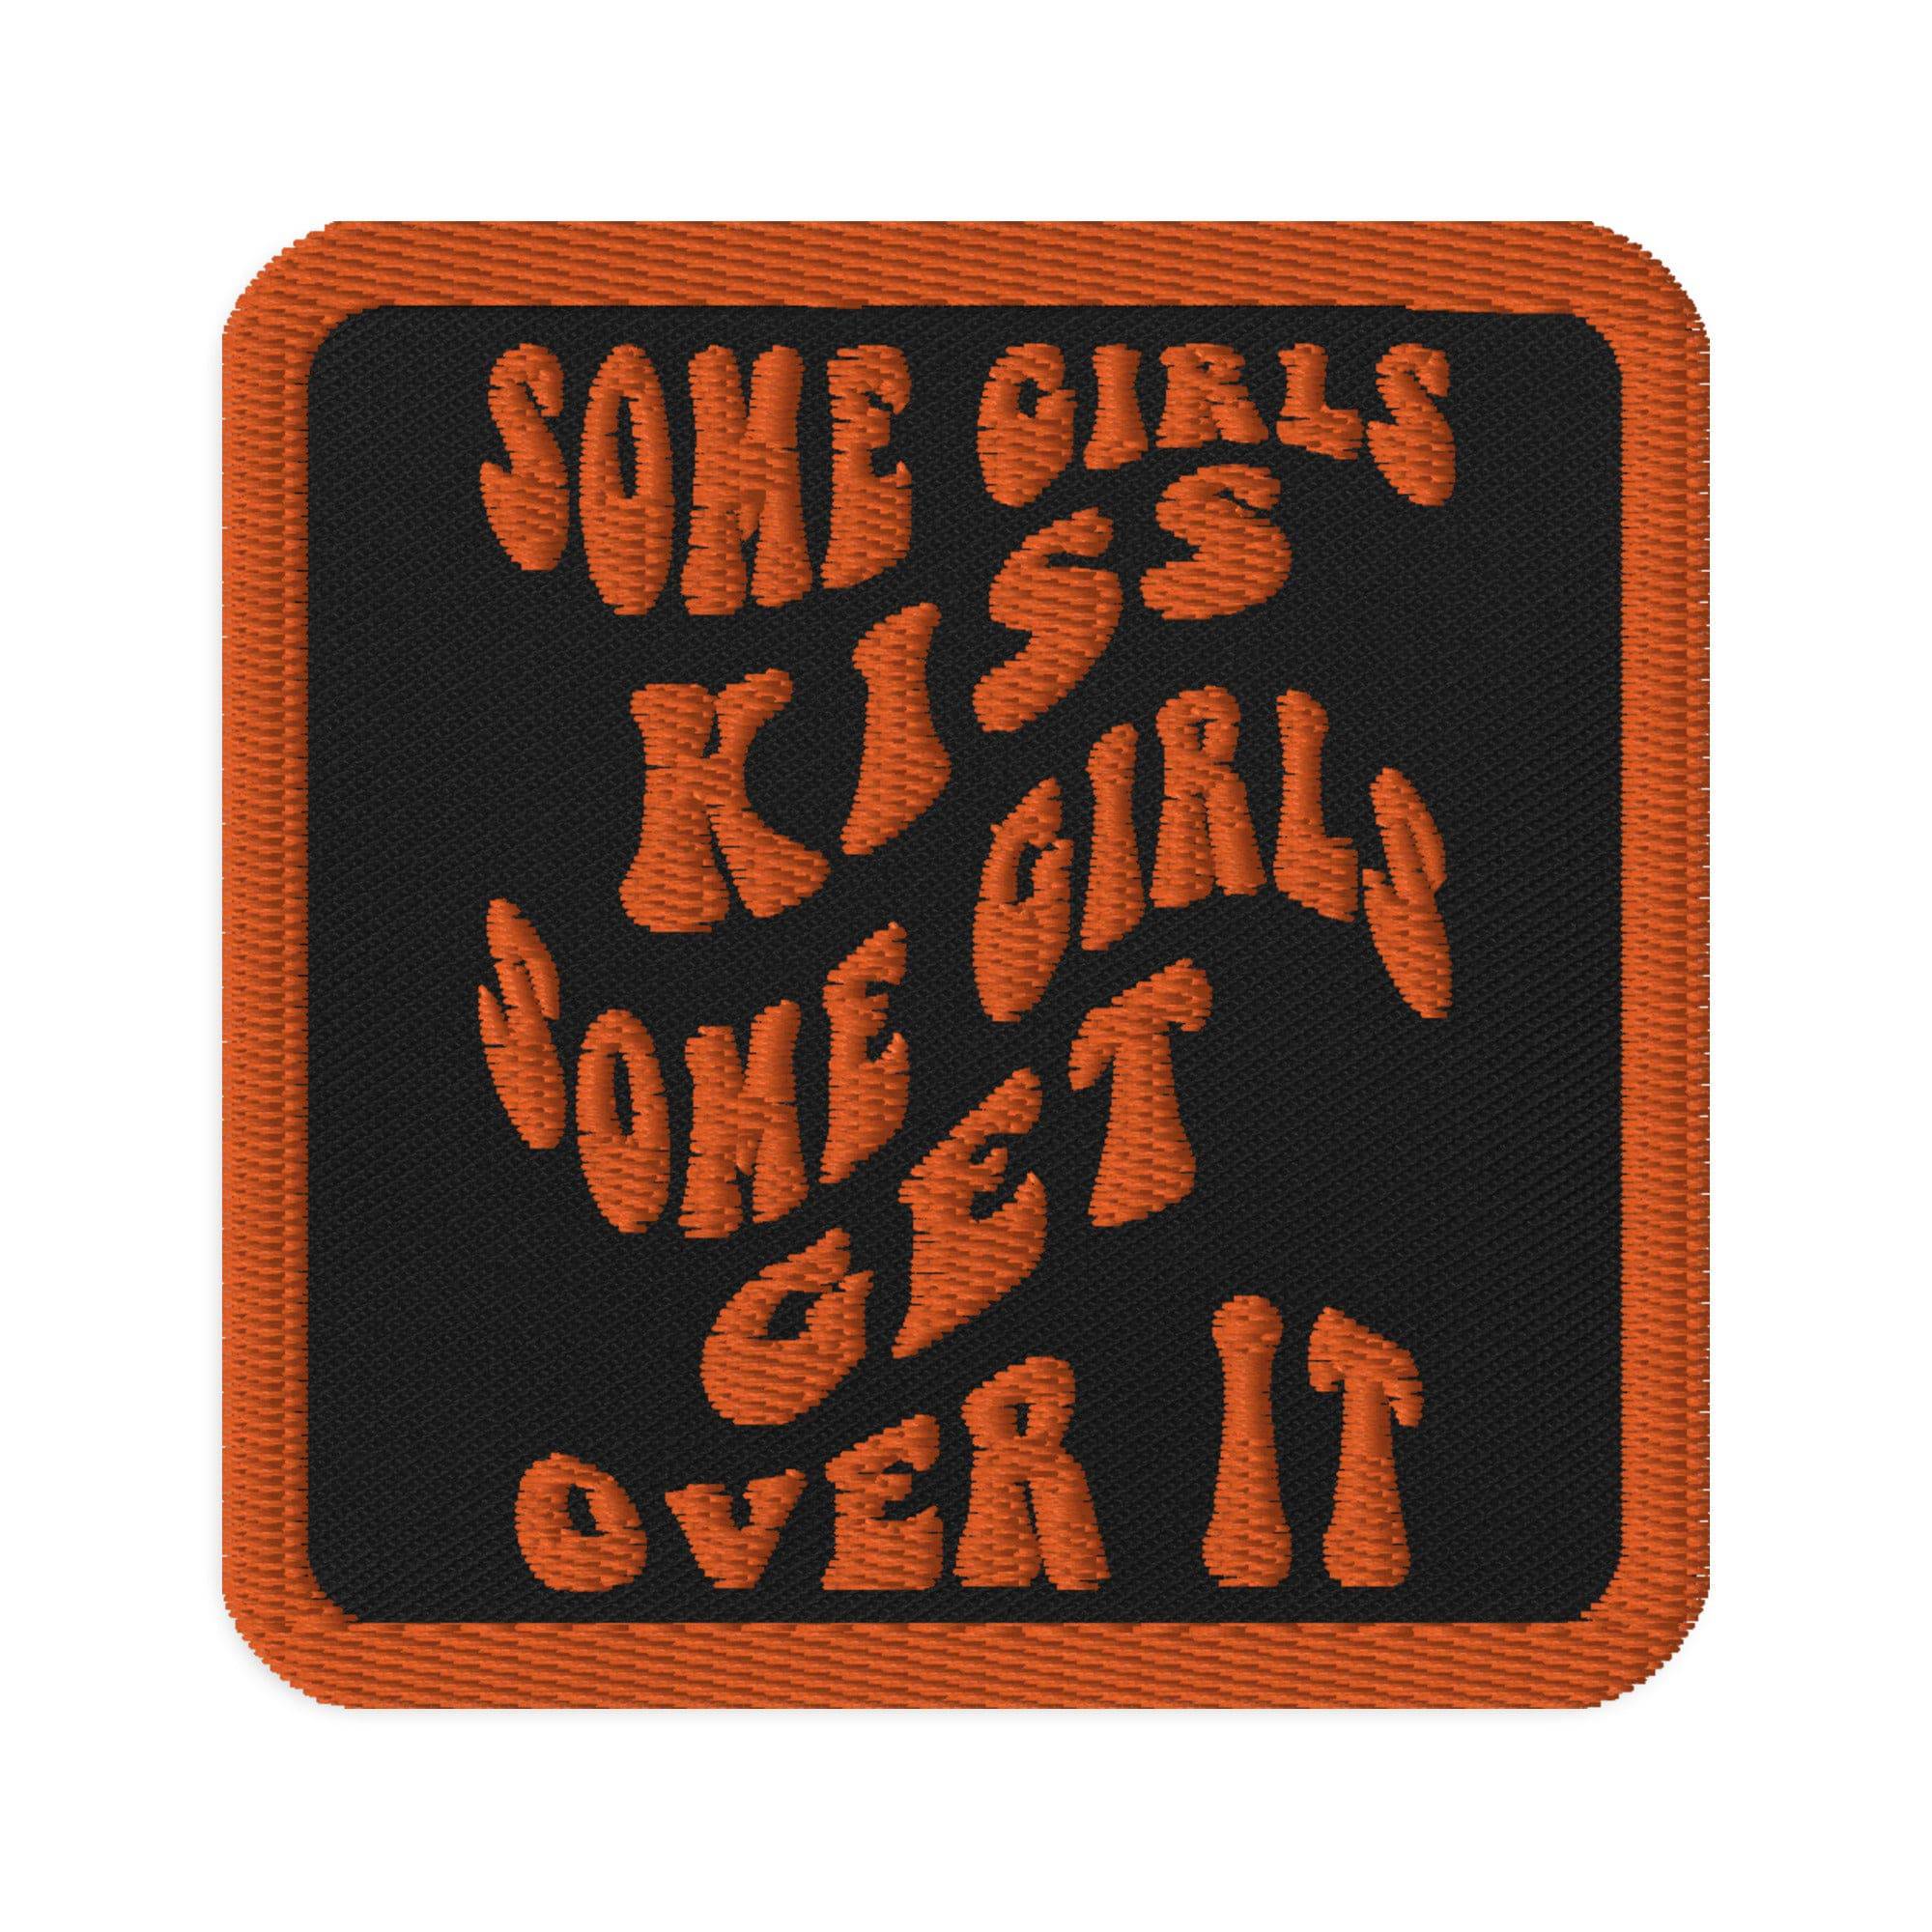 Some Girls Kiss Girls Lesbian WLW Embroidered patch